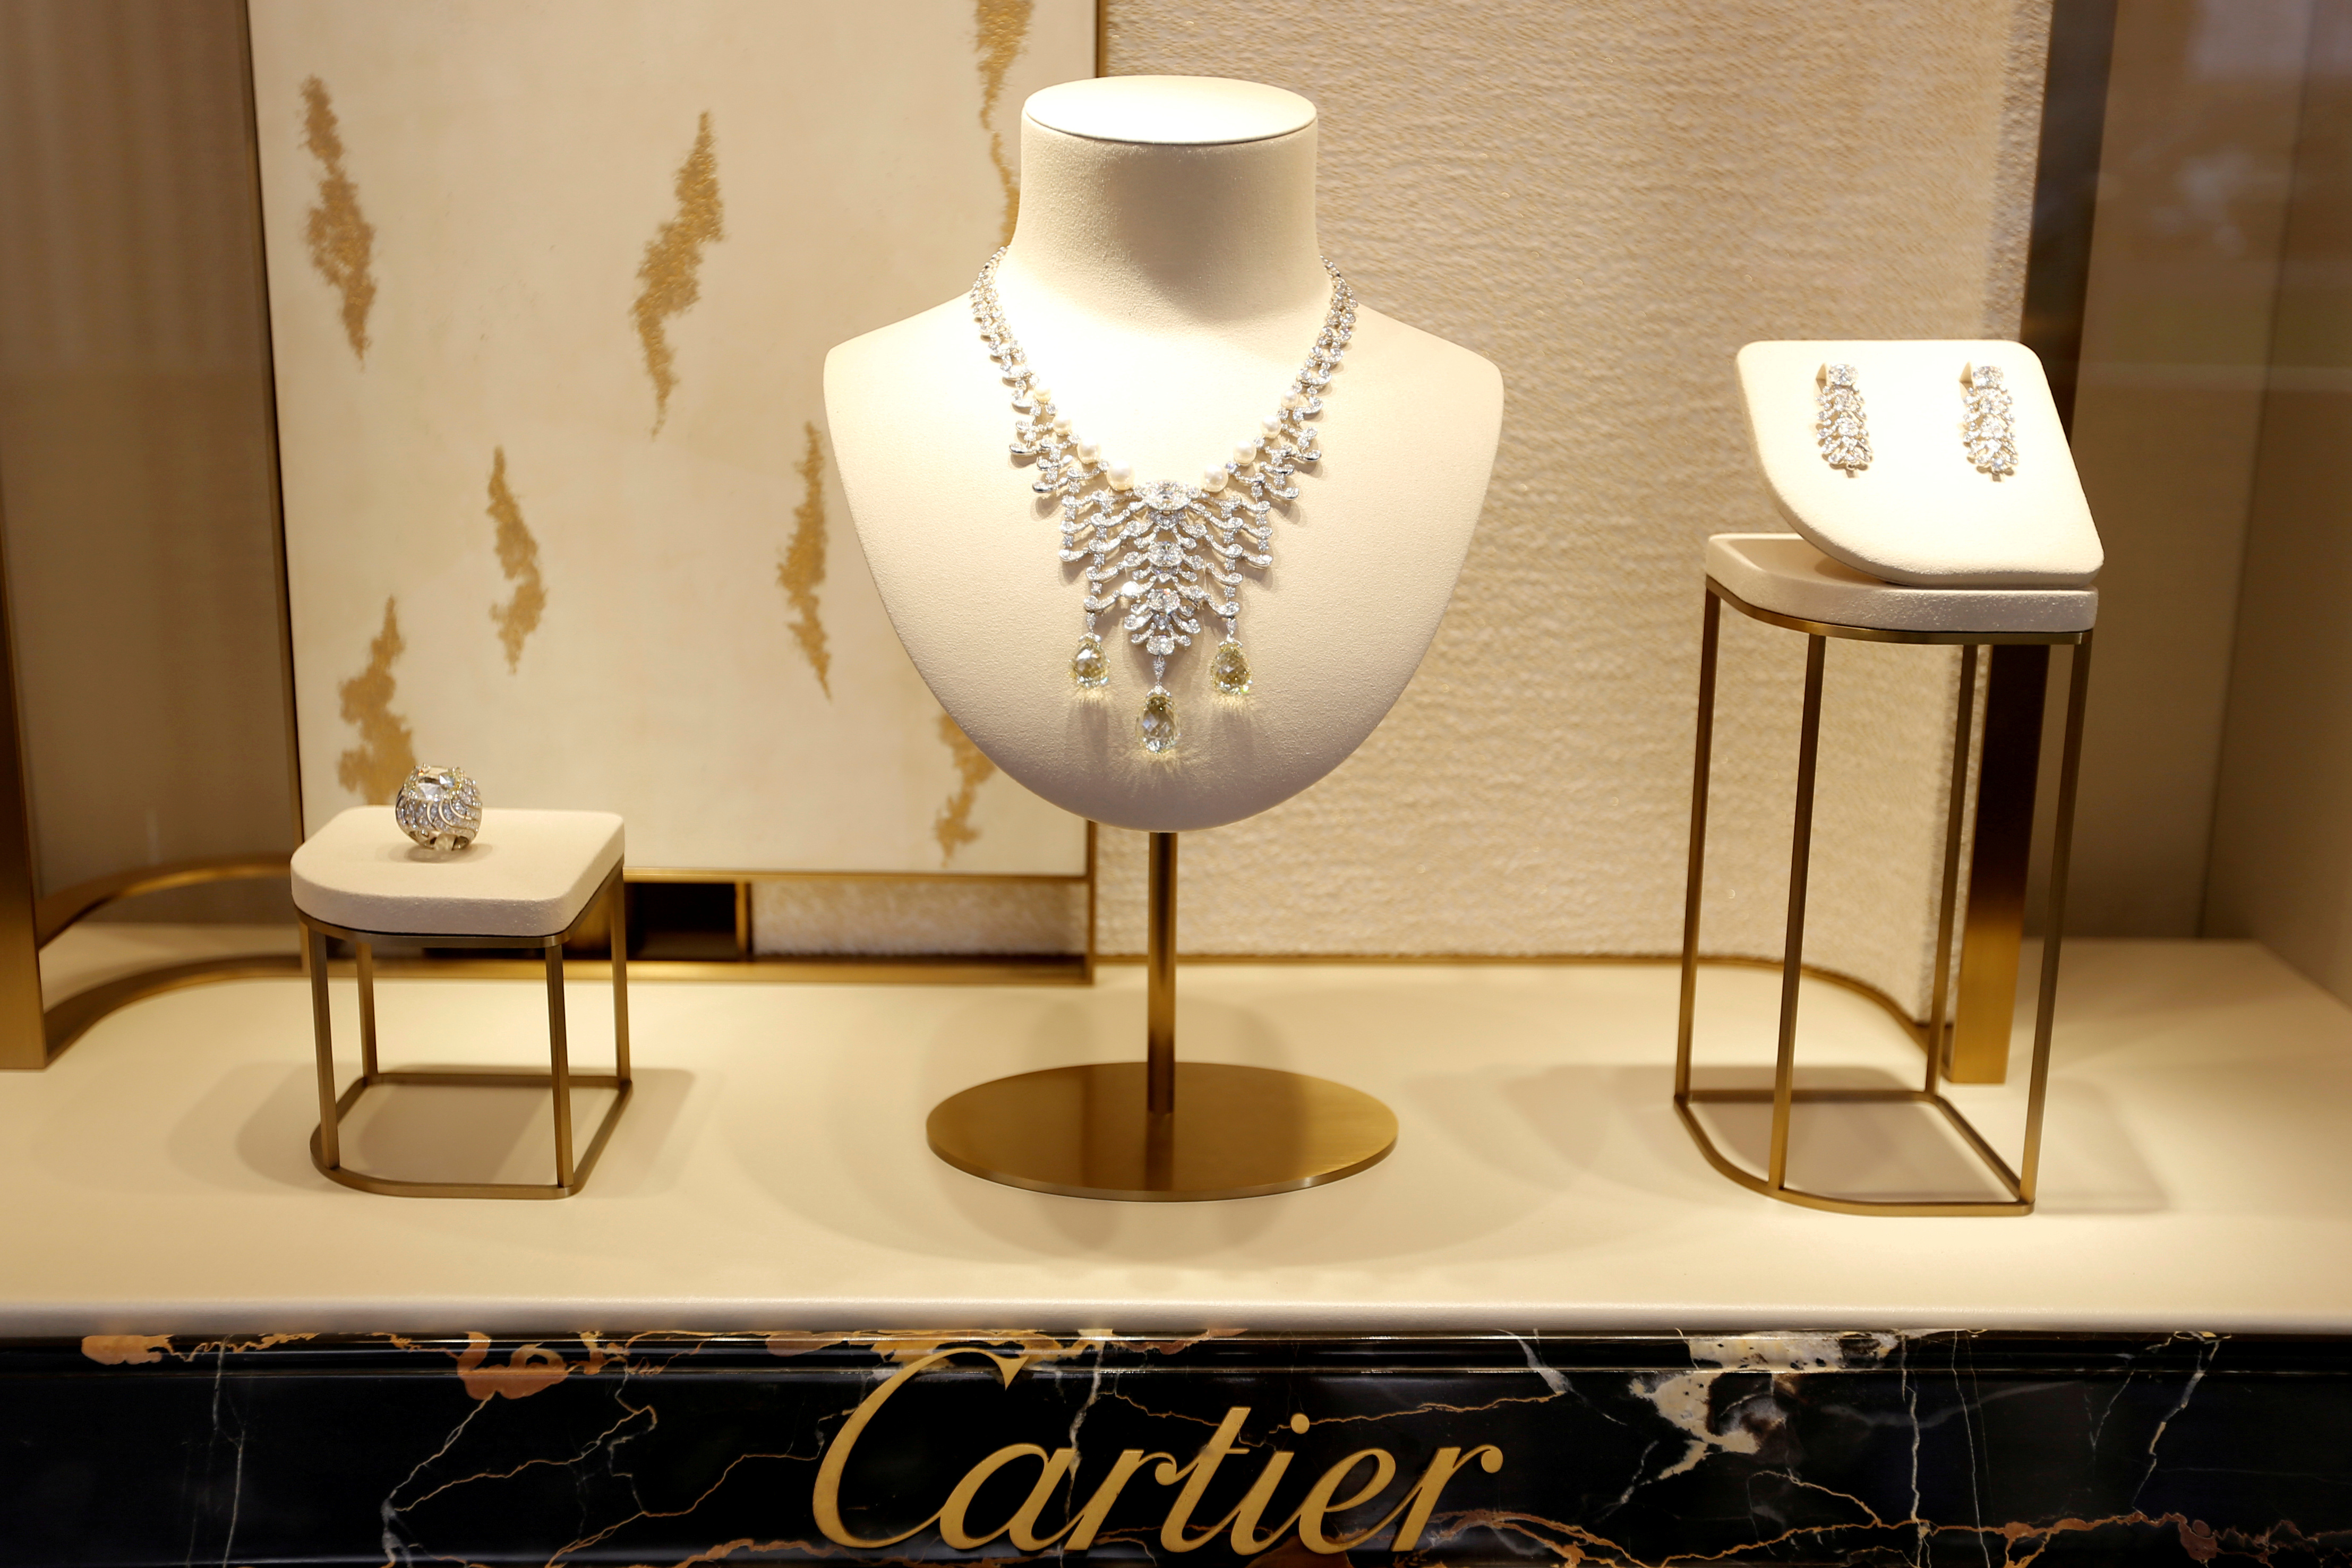 Jewellery is displayed at a Cartier store on Place Vendome in Paris